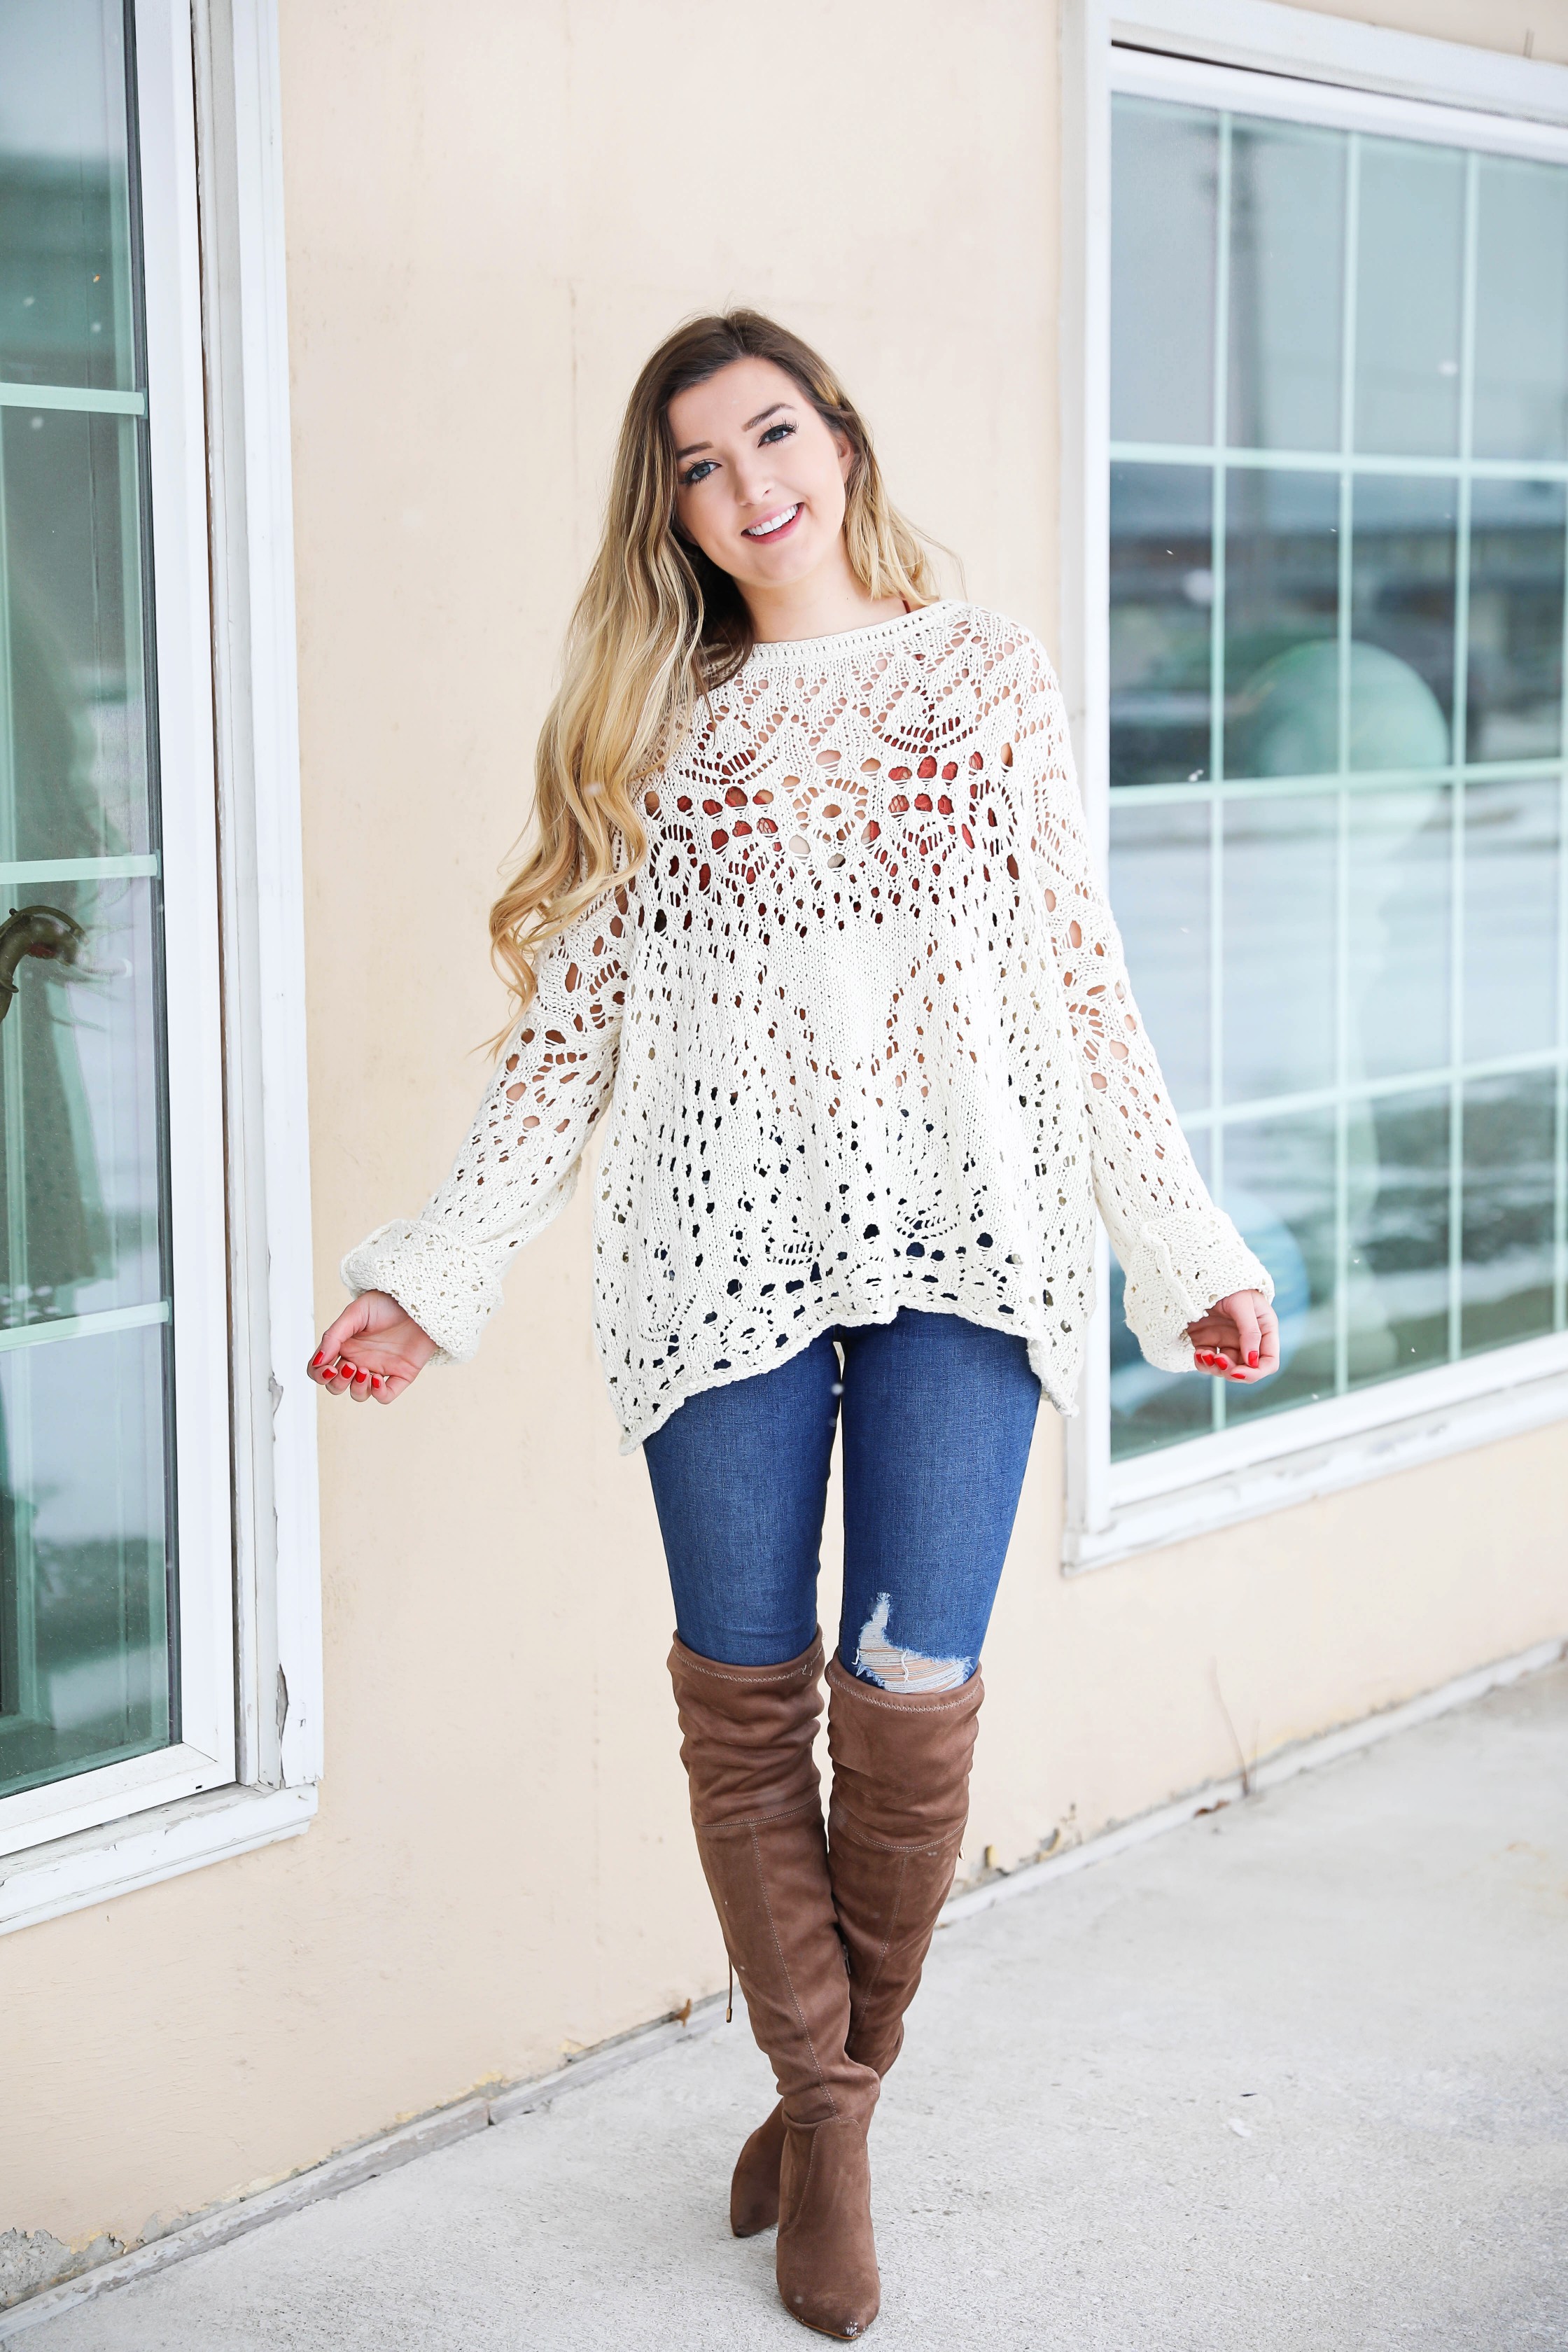 Free People crochet sweater and rust orange bralette peaking through the sweater! Love it with these over the knee boots and ripped denim jeans! Find the details on fashion blog daily dose of charm by lauren lindmark